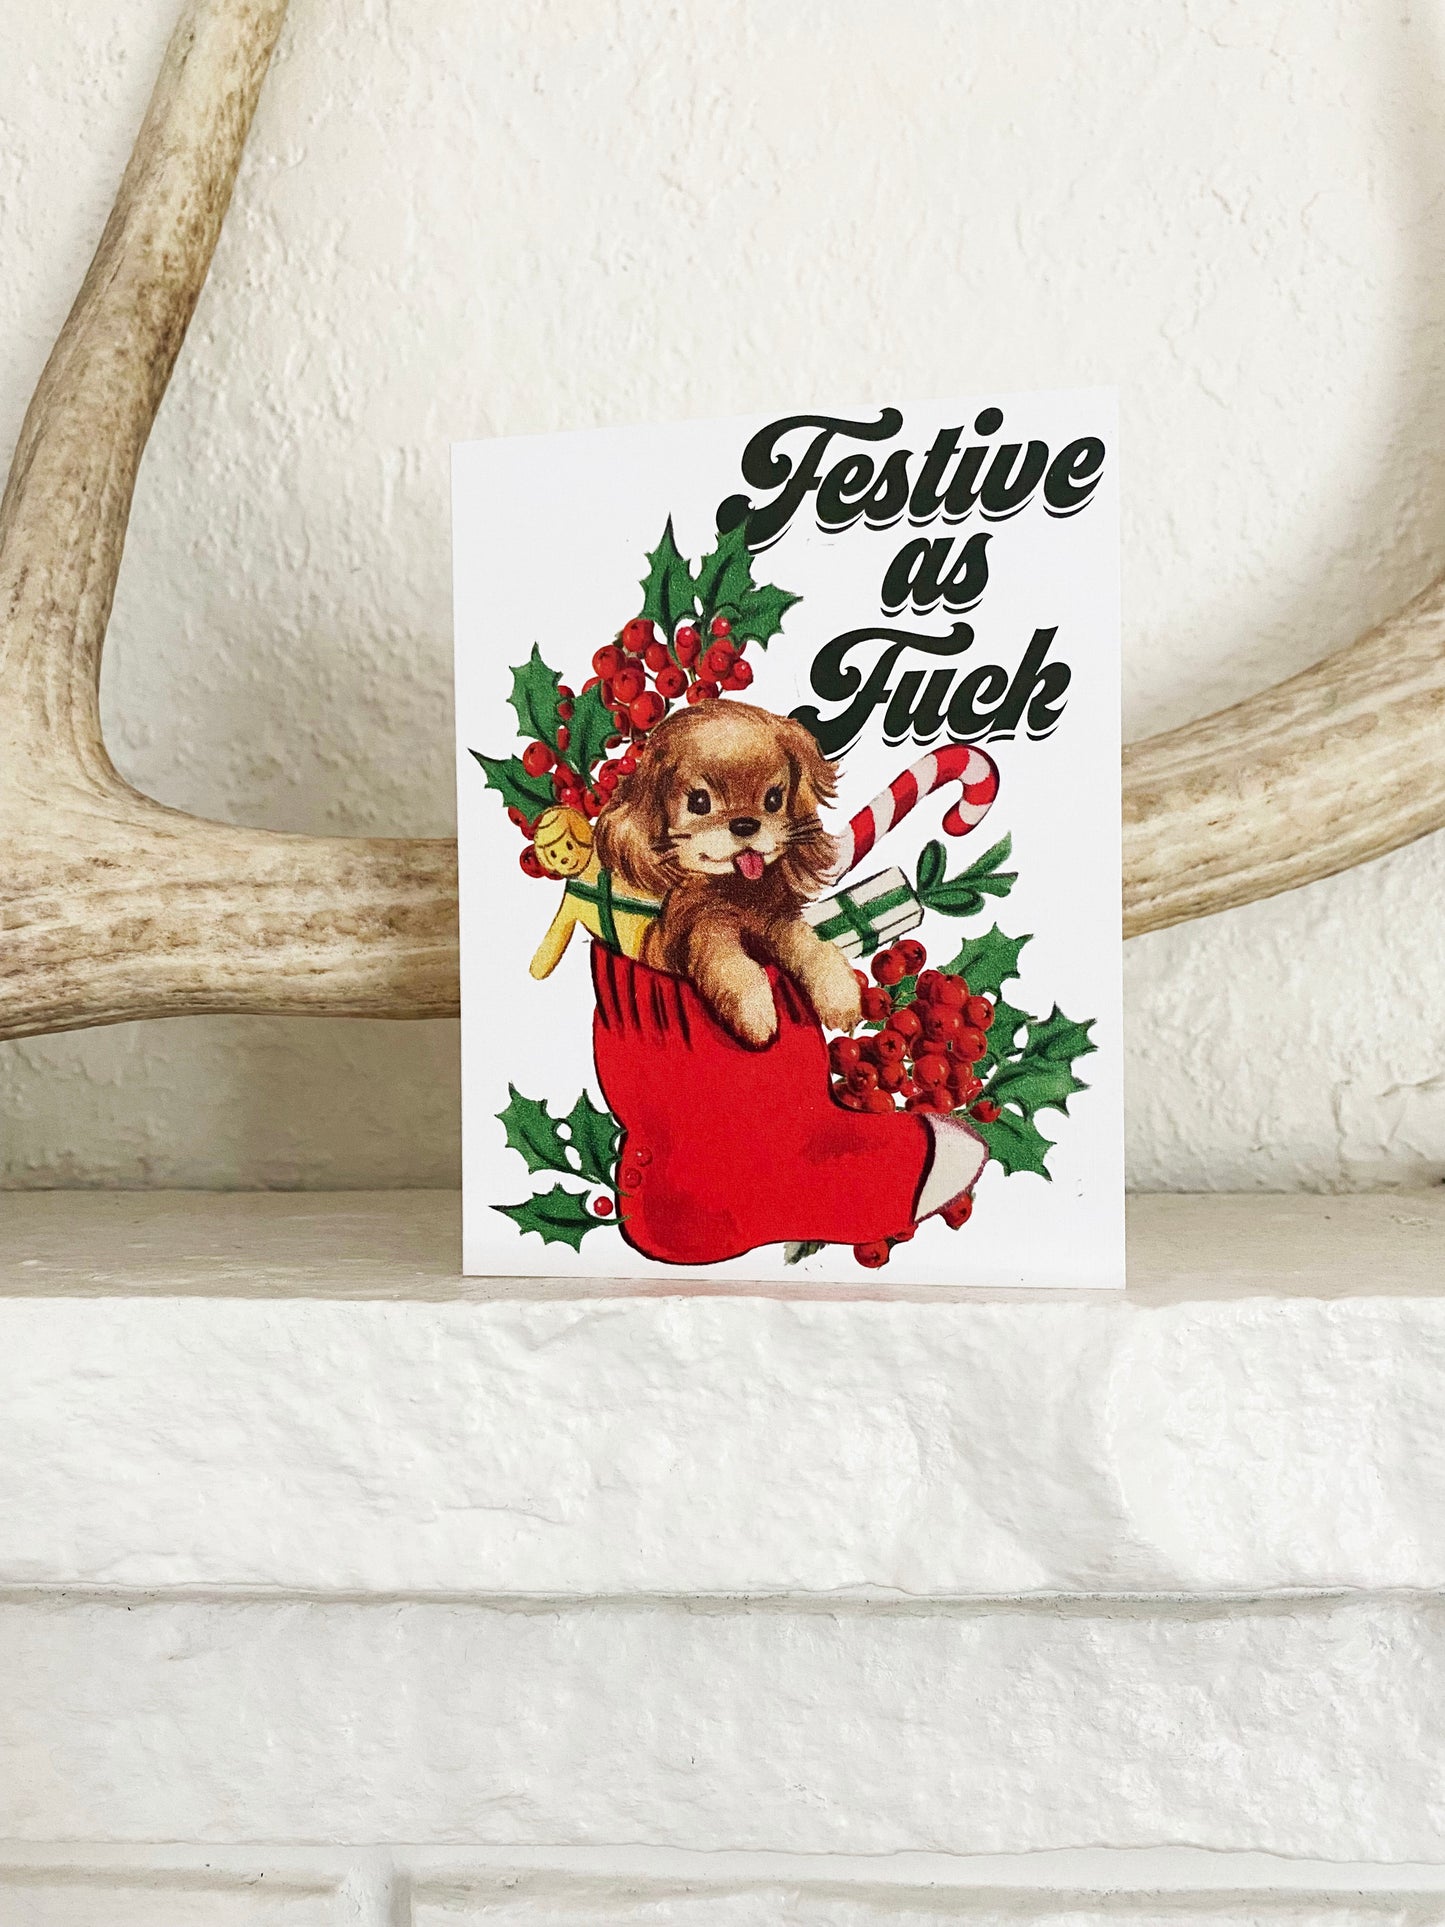 adorable puppy dog brown in a red stocking cute with candy cane funny christmas card holiday snarky festive as fuck with swear words blank inside just because winter festivus snail mail friends coin laundry 